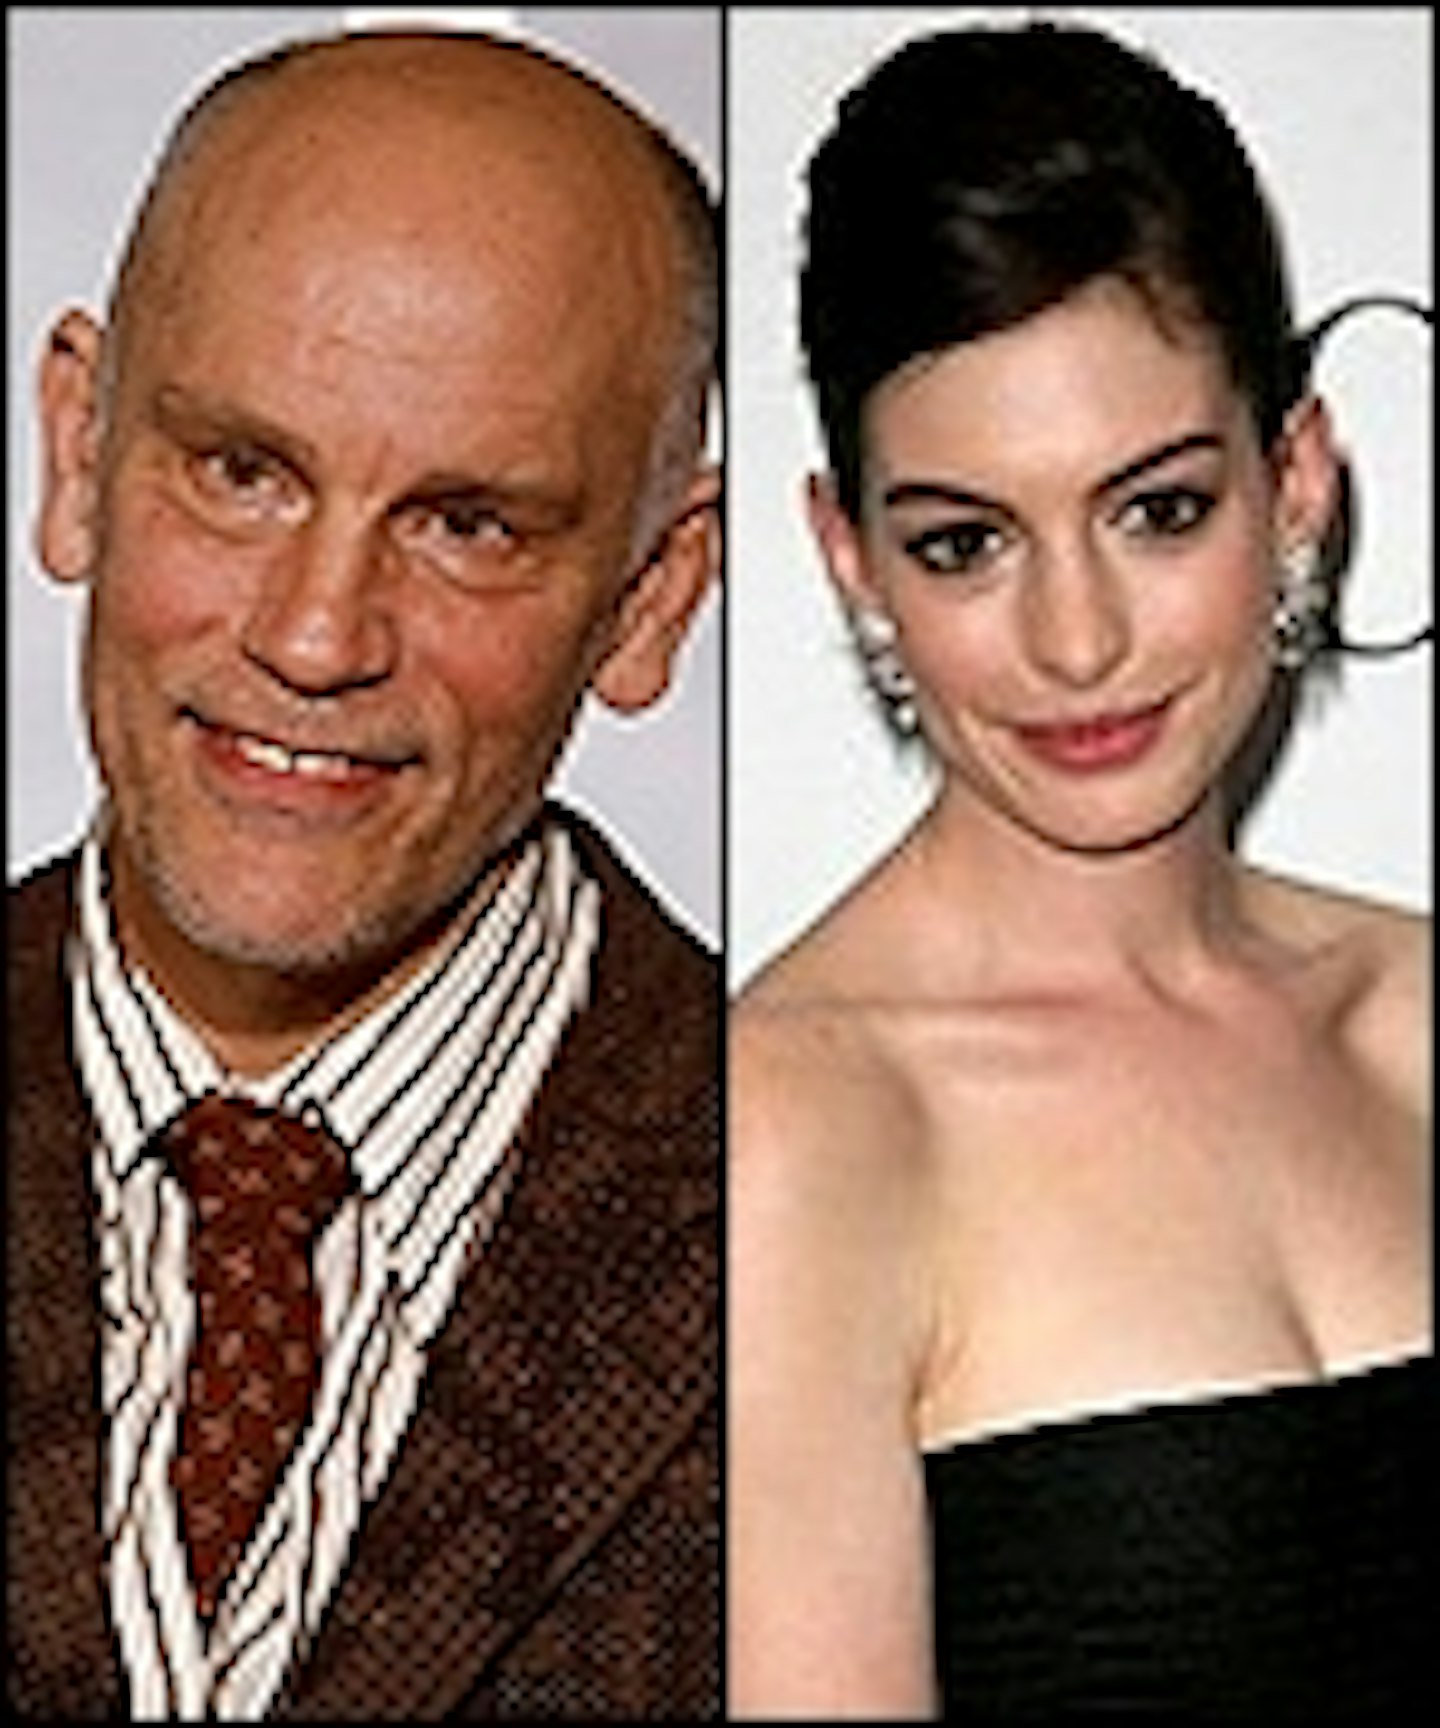 Hathaway And Malkovich Are Vultures?